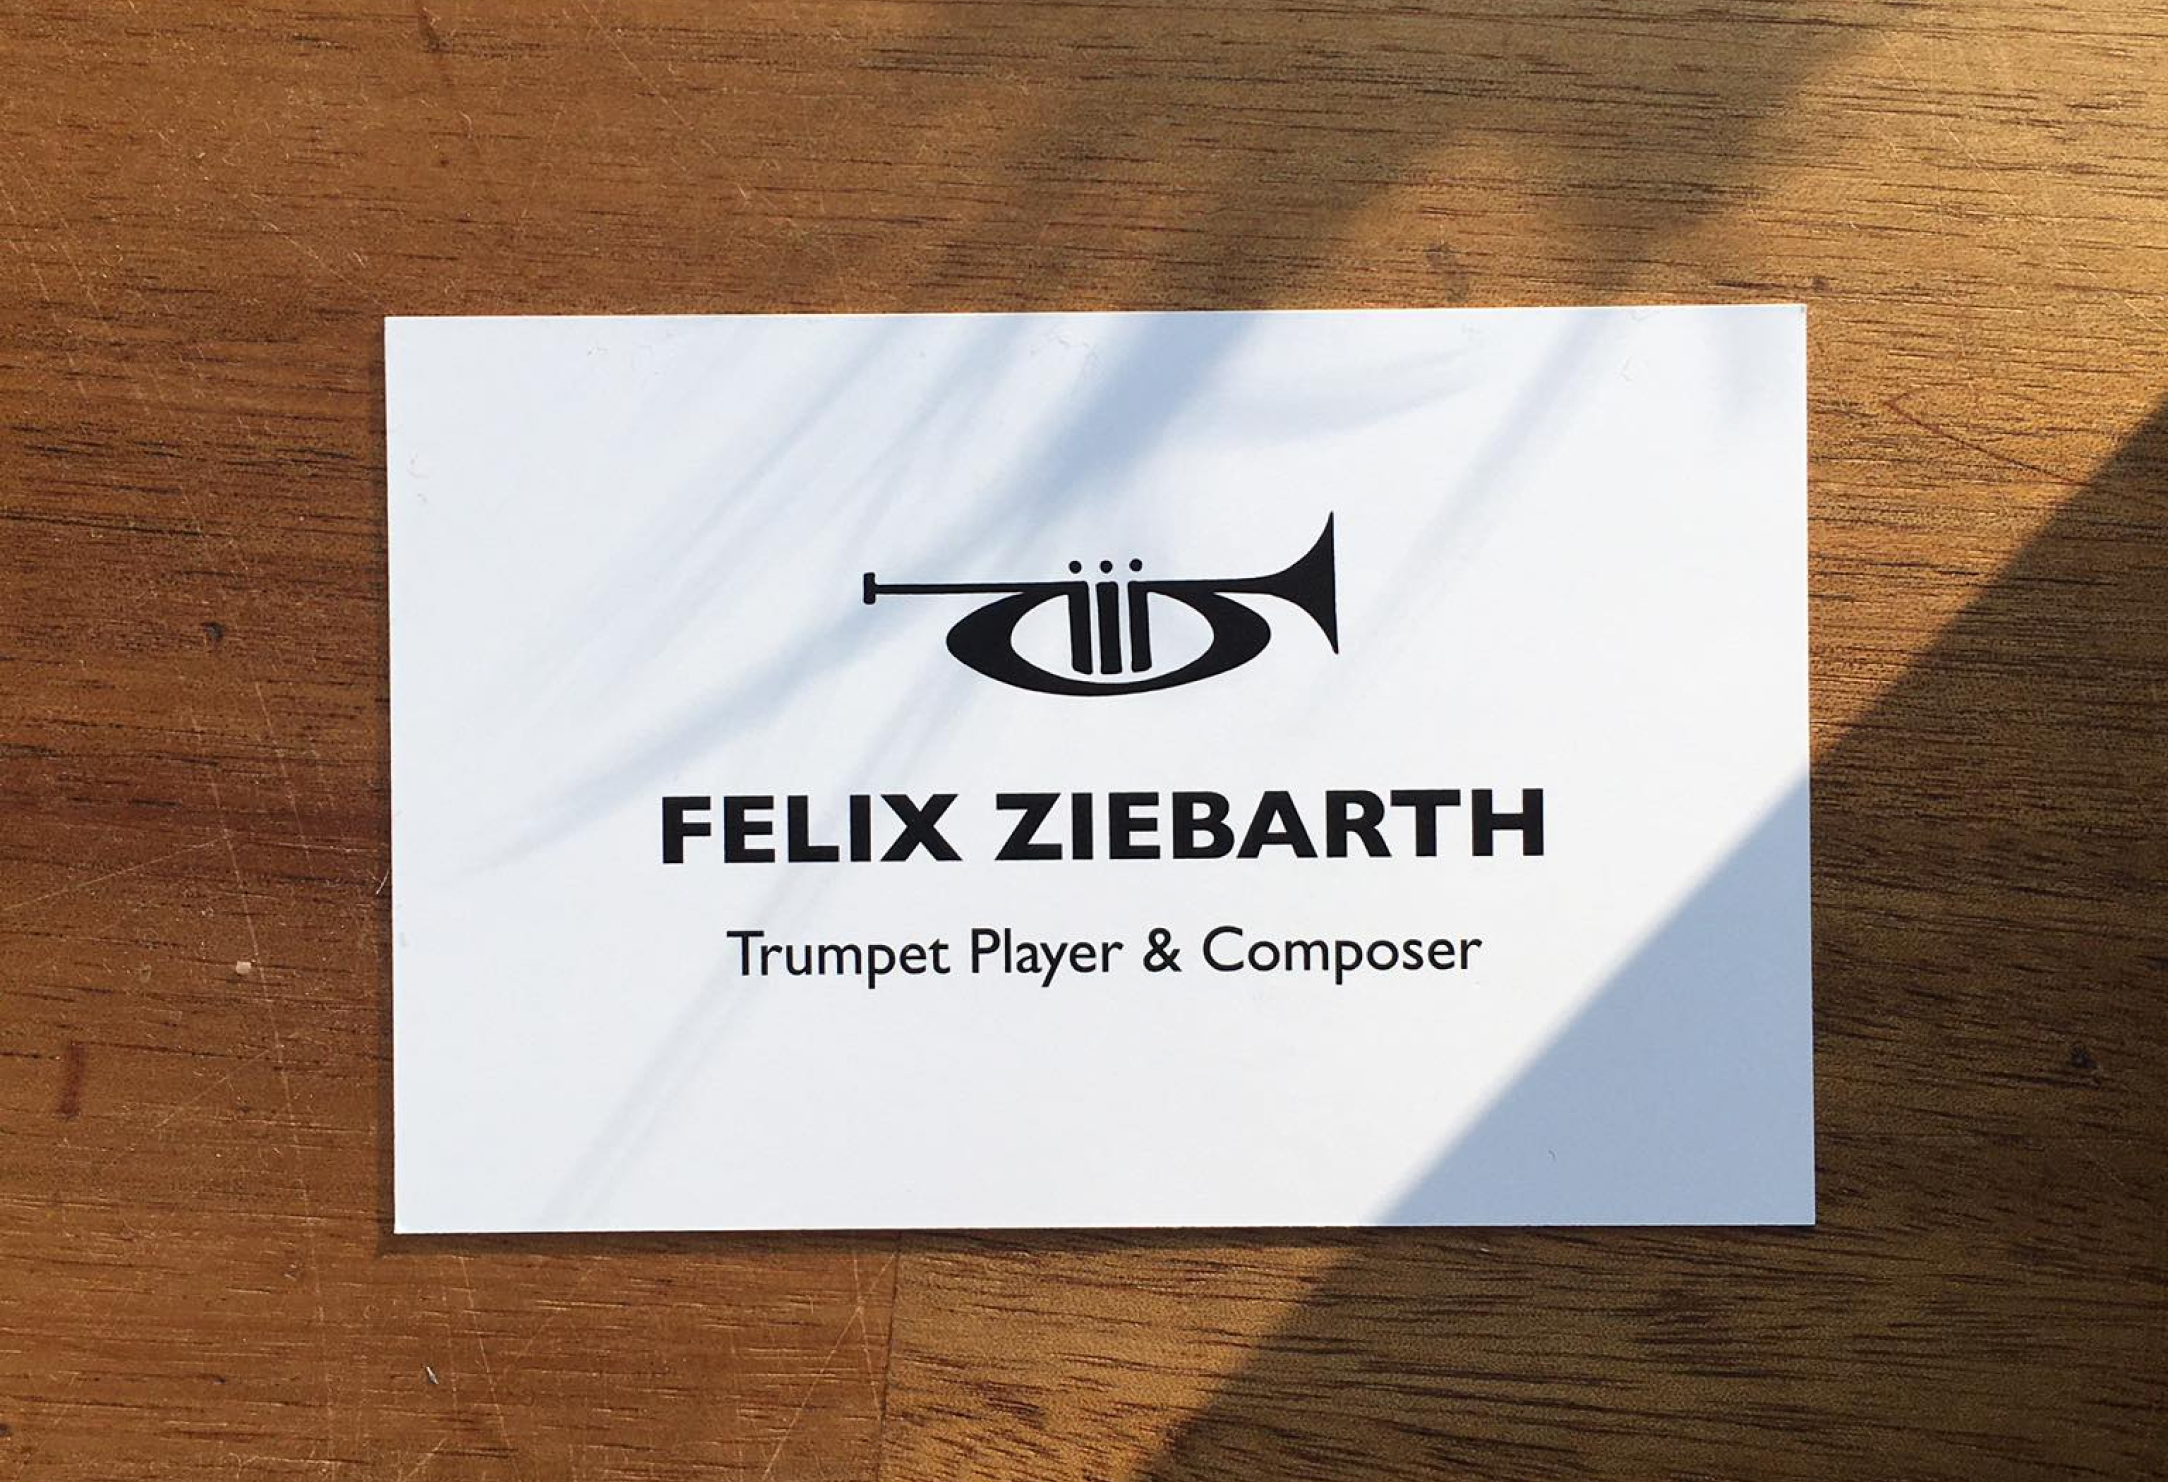 A minimalistic business card with a drawing of a trumpet